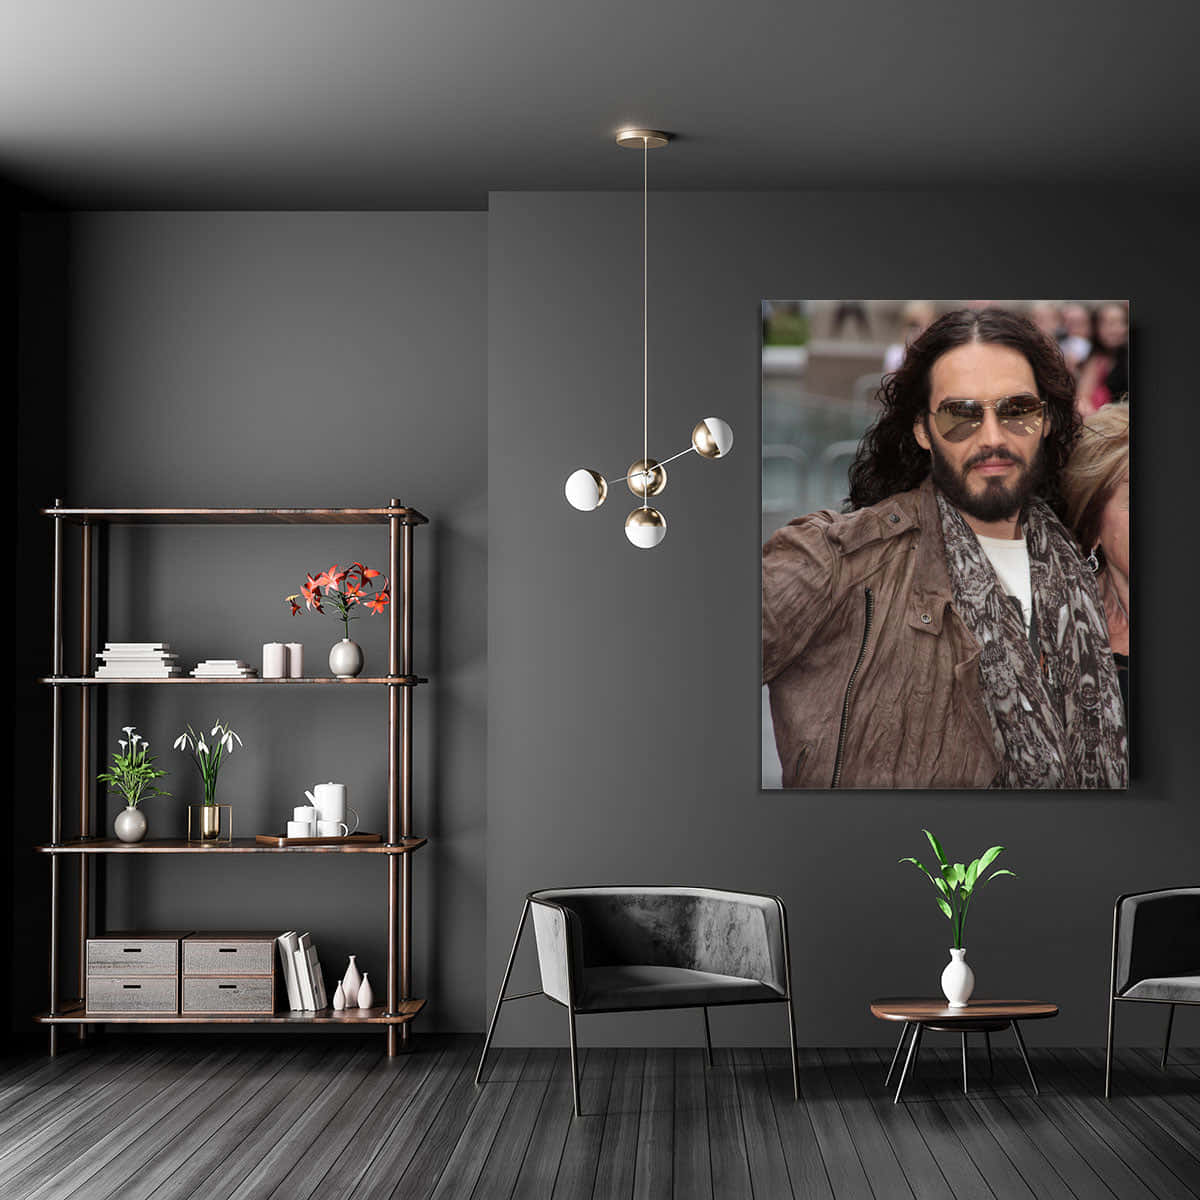 A captivating portrait of Russell Brand in a contemplative mood. Wallpaper